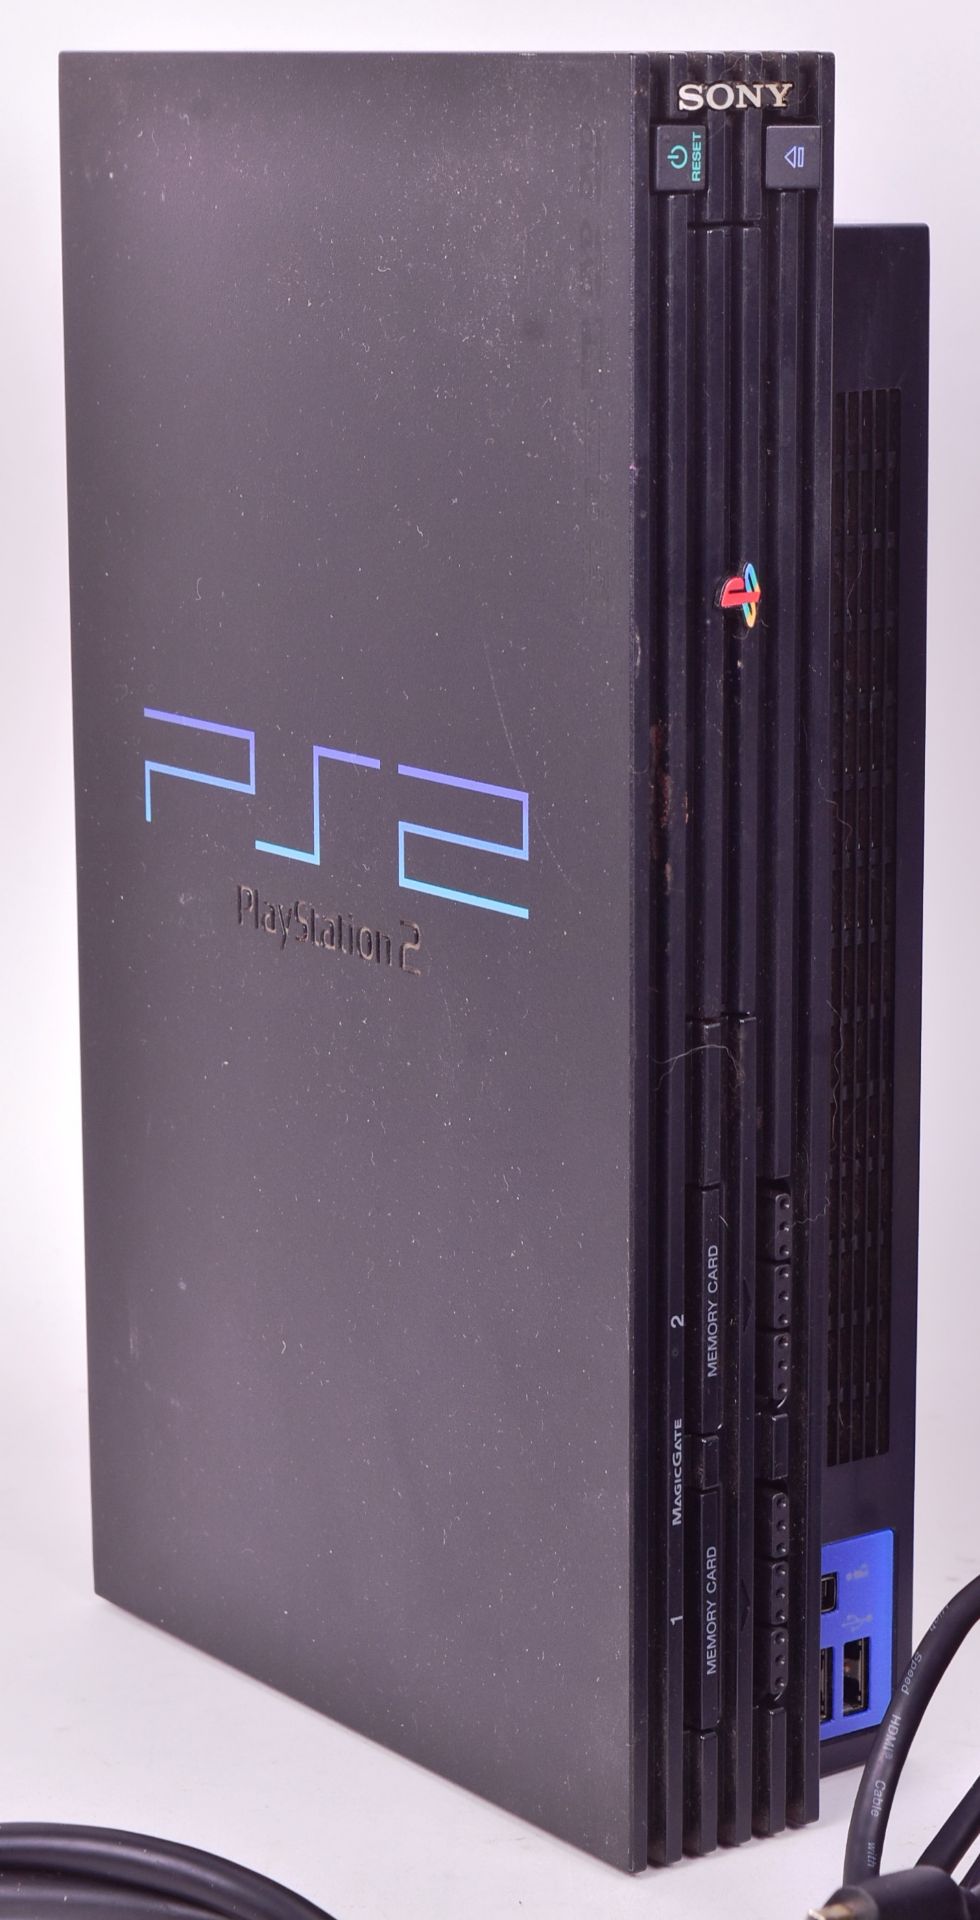 RETRO GAMING - PS2 PLAYSTATION CONSOLE & GAMES - Image 2 of 7